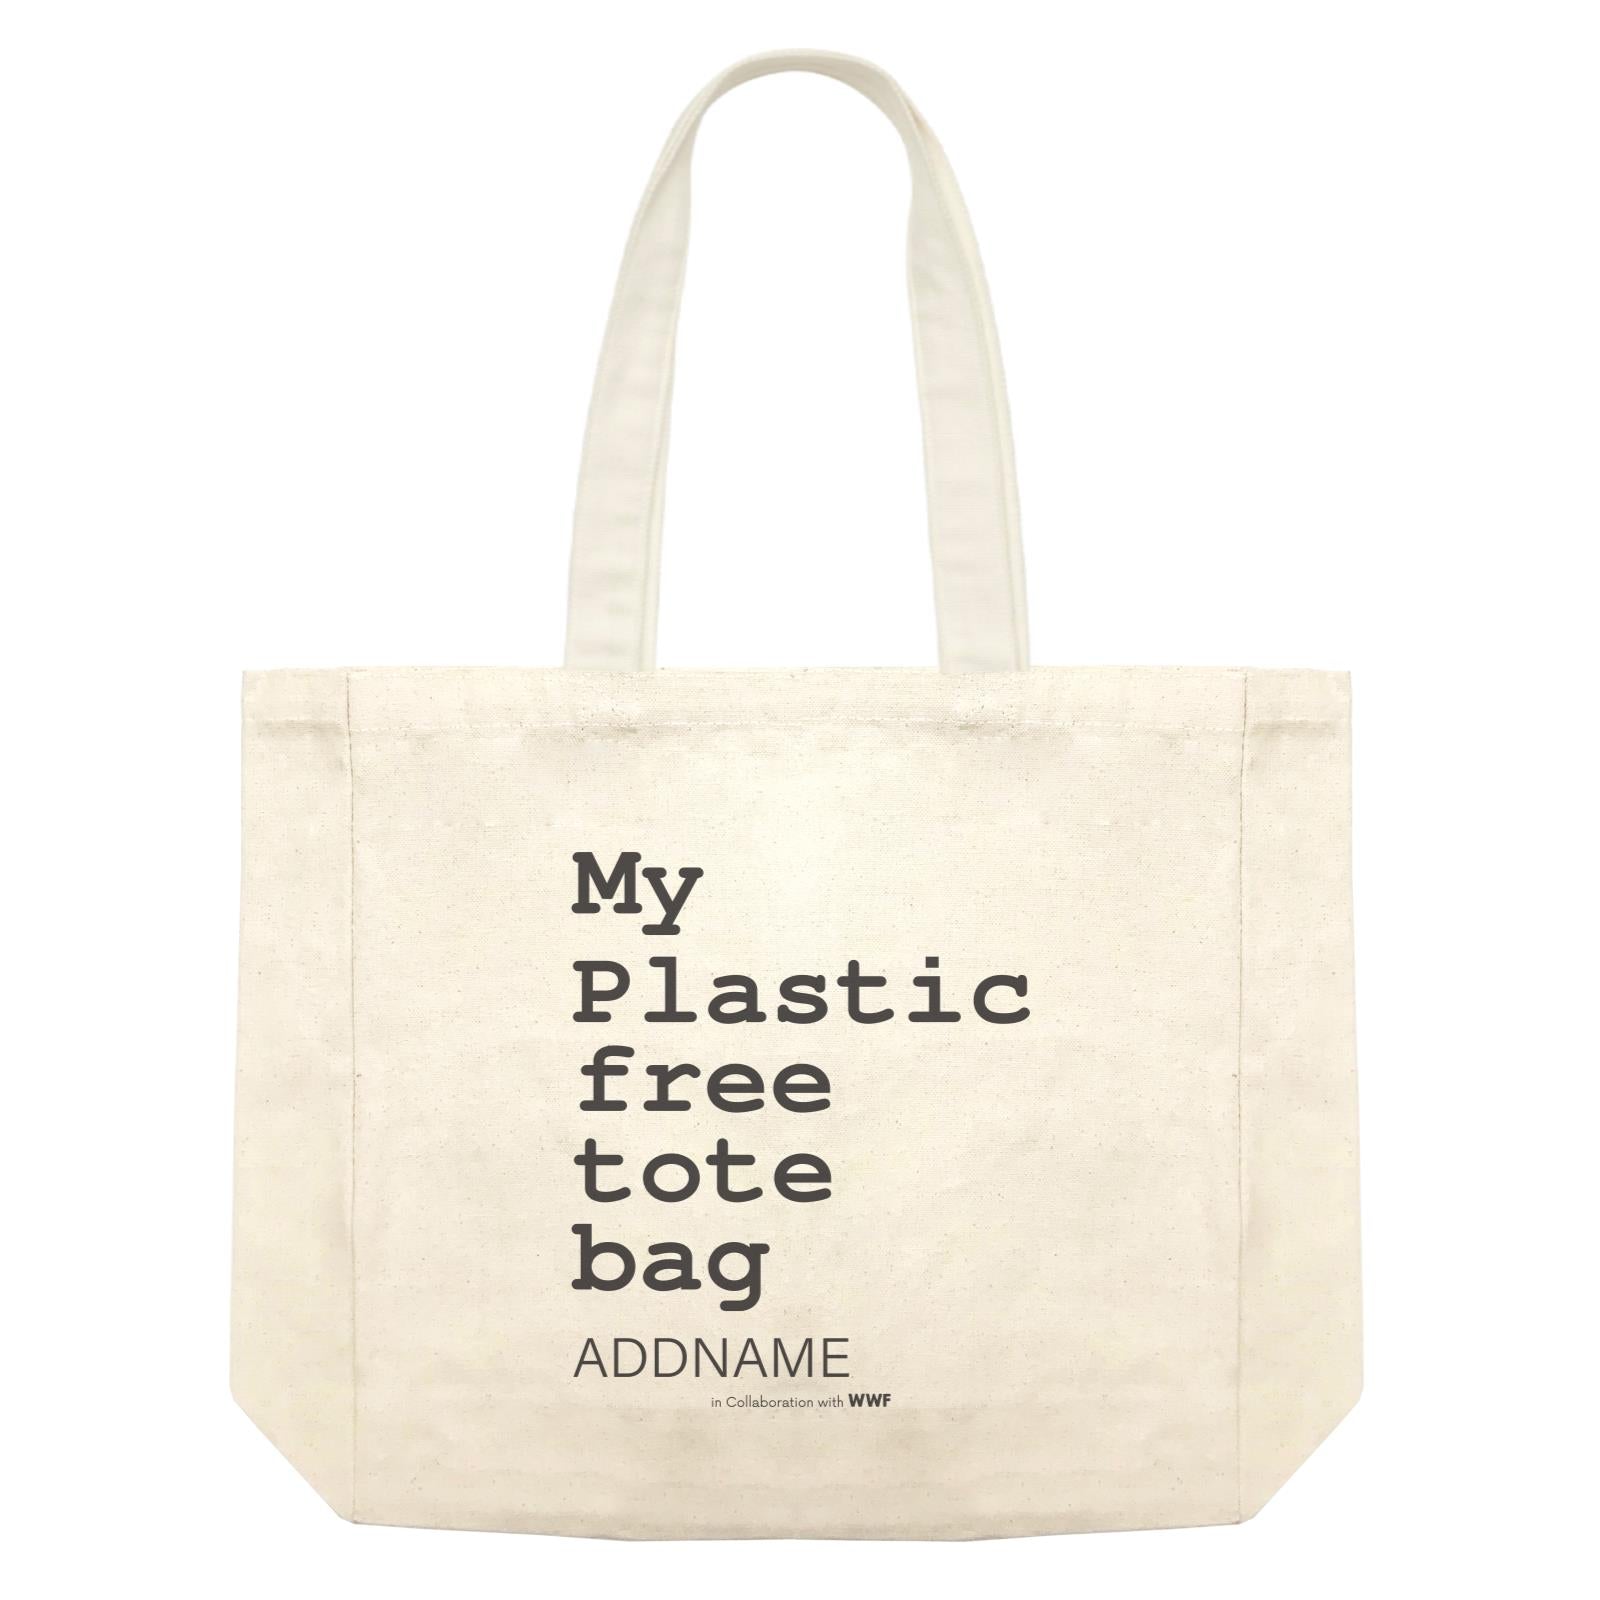 My Plastic Free Grocery Bag Addname Shopping Bag